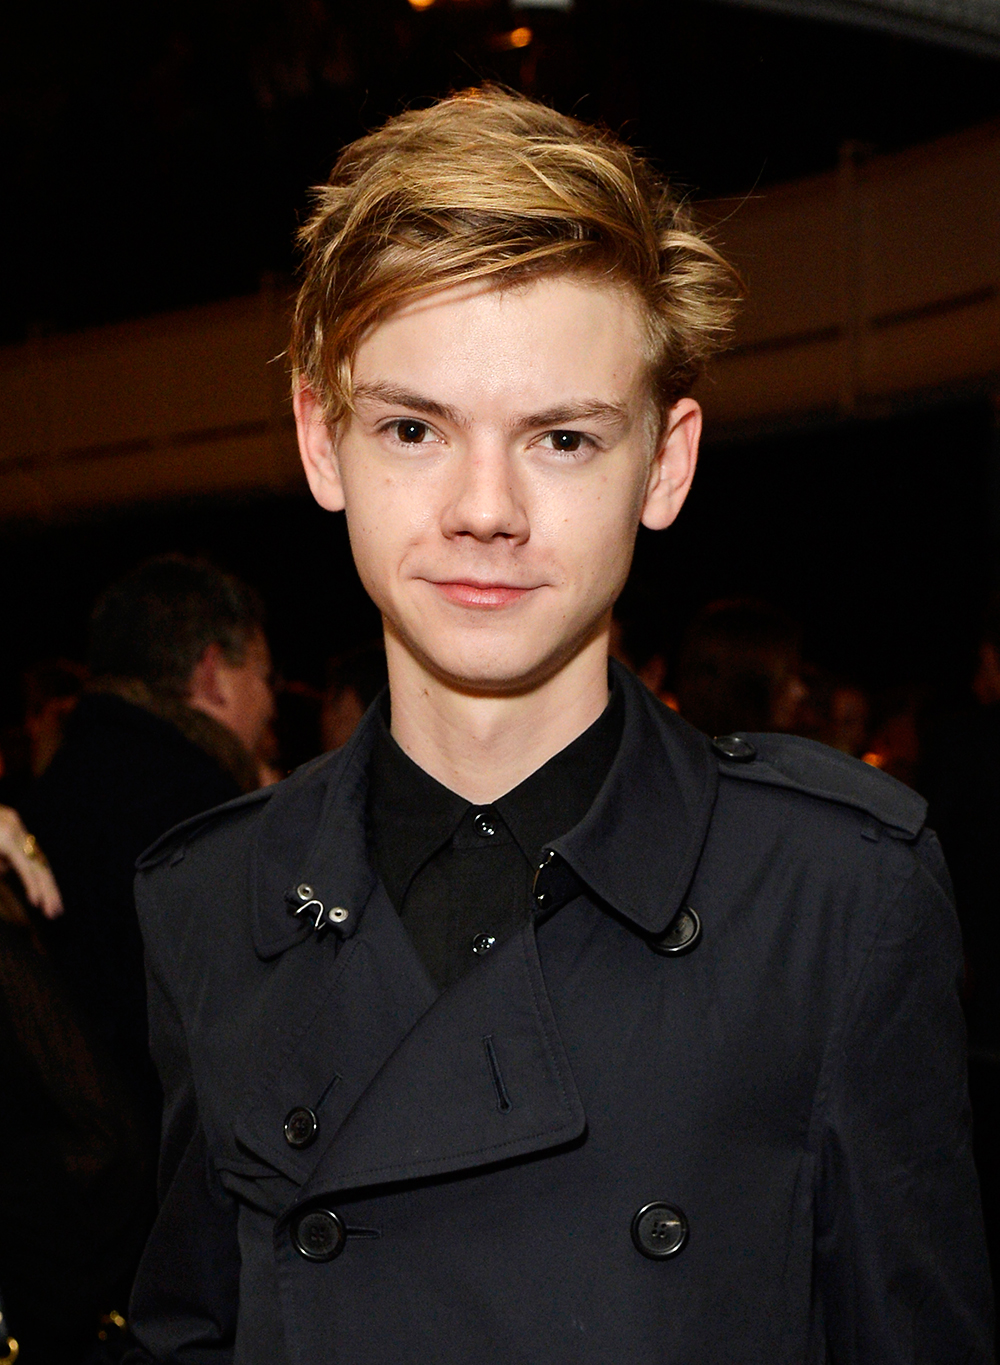 Thomas Brodie Sangster at the Burberry festive film premiere